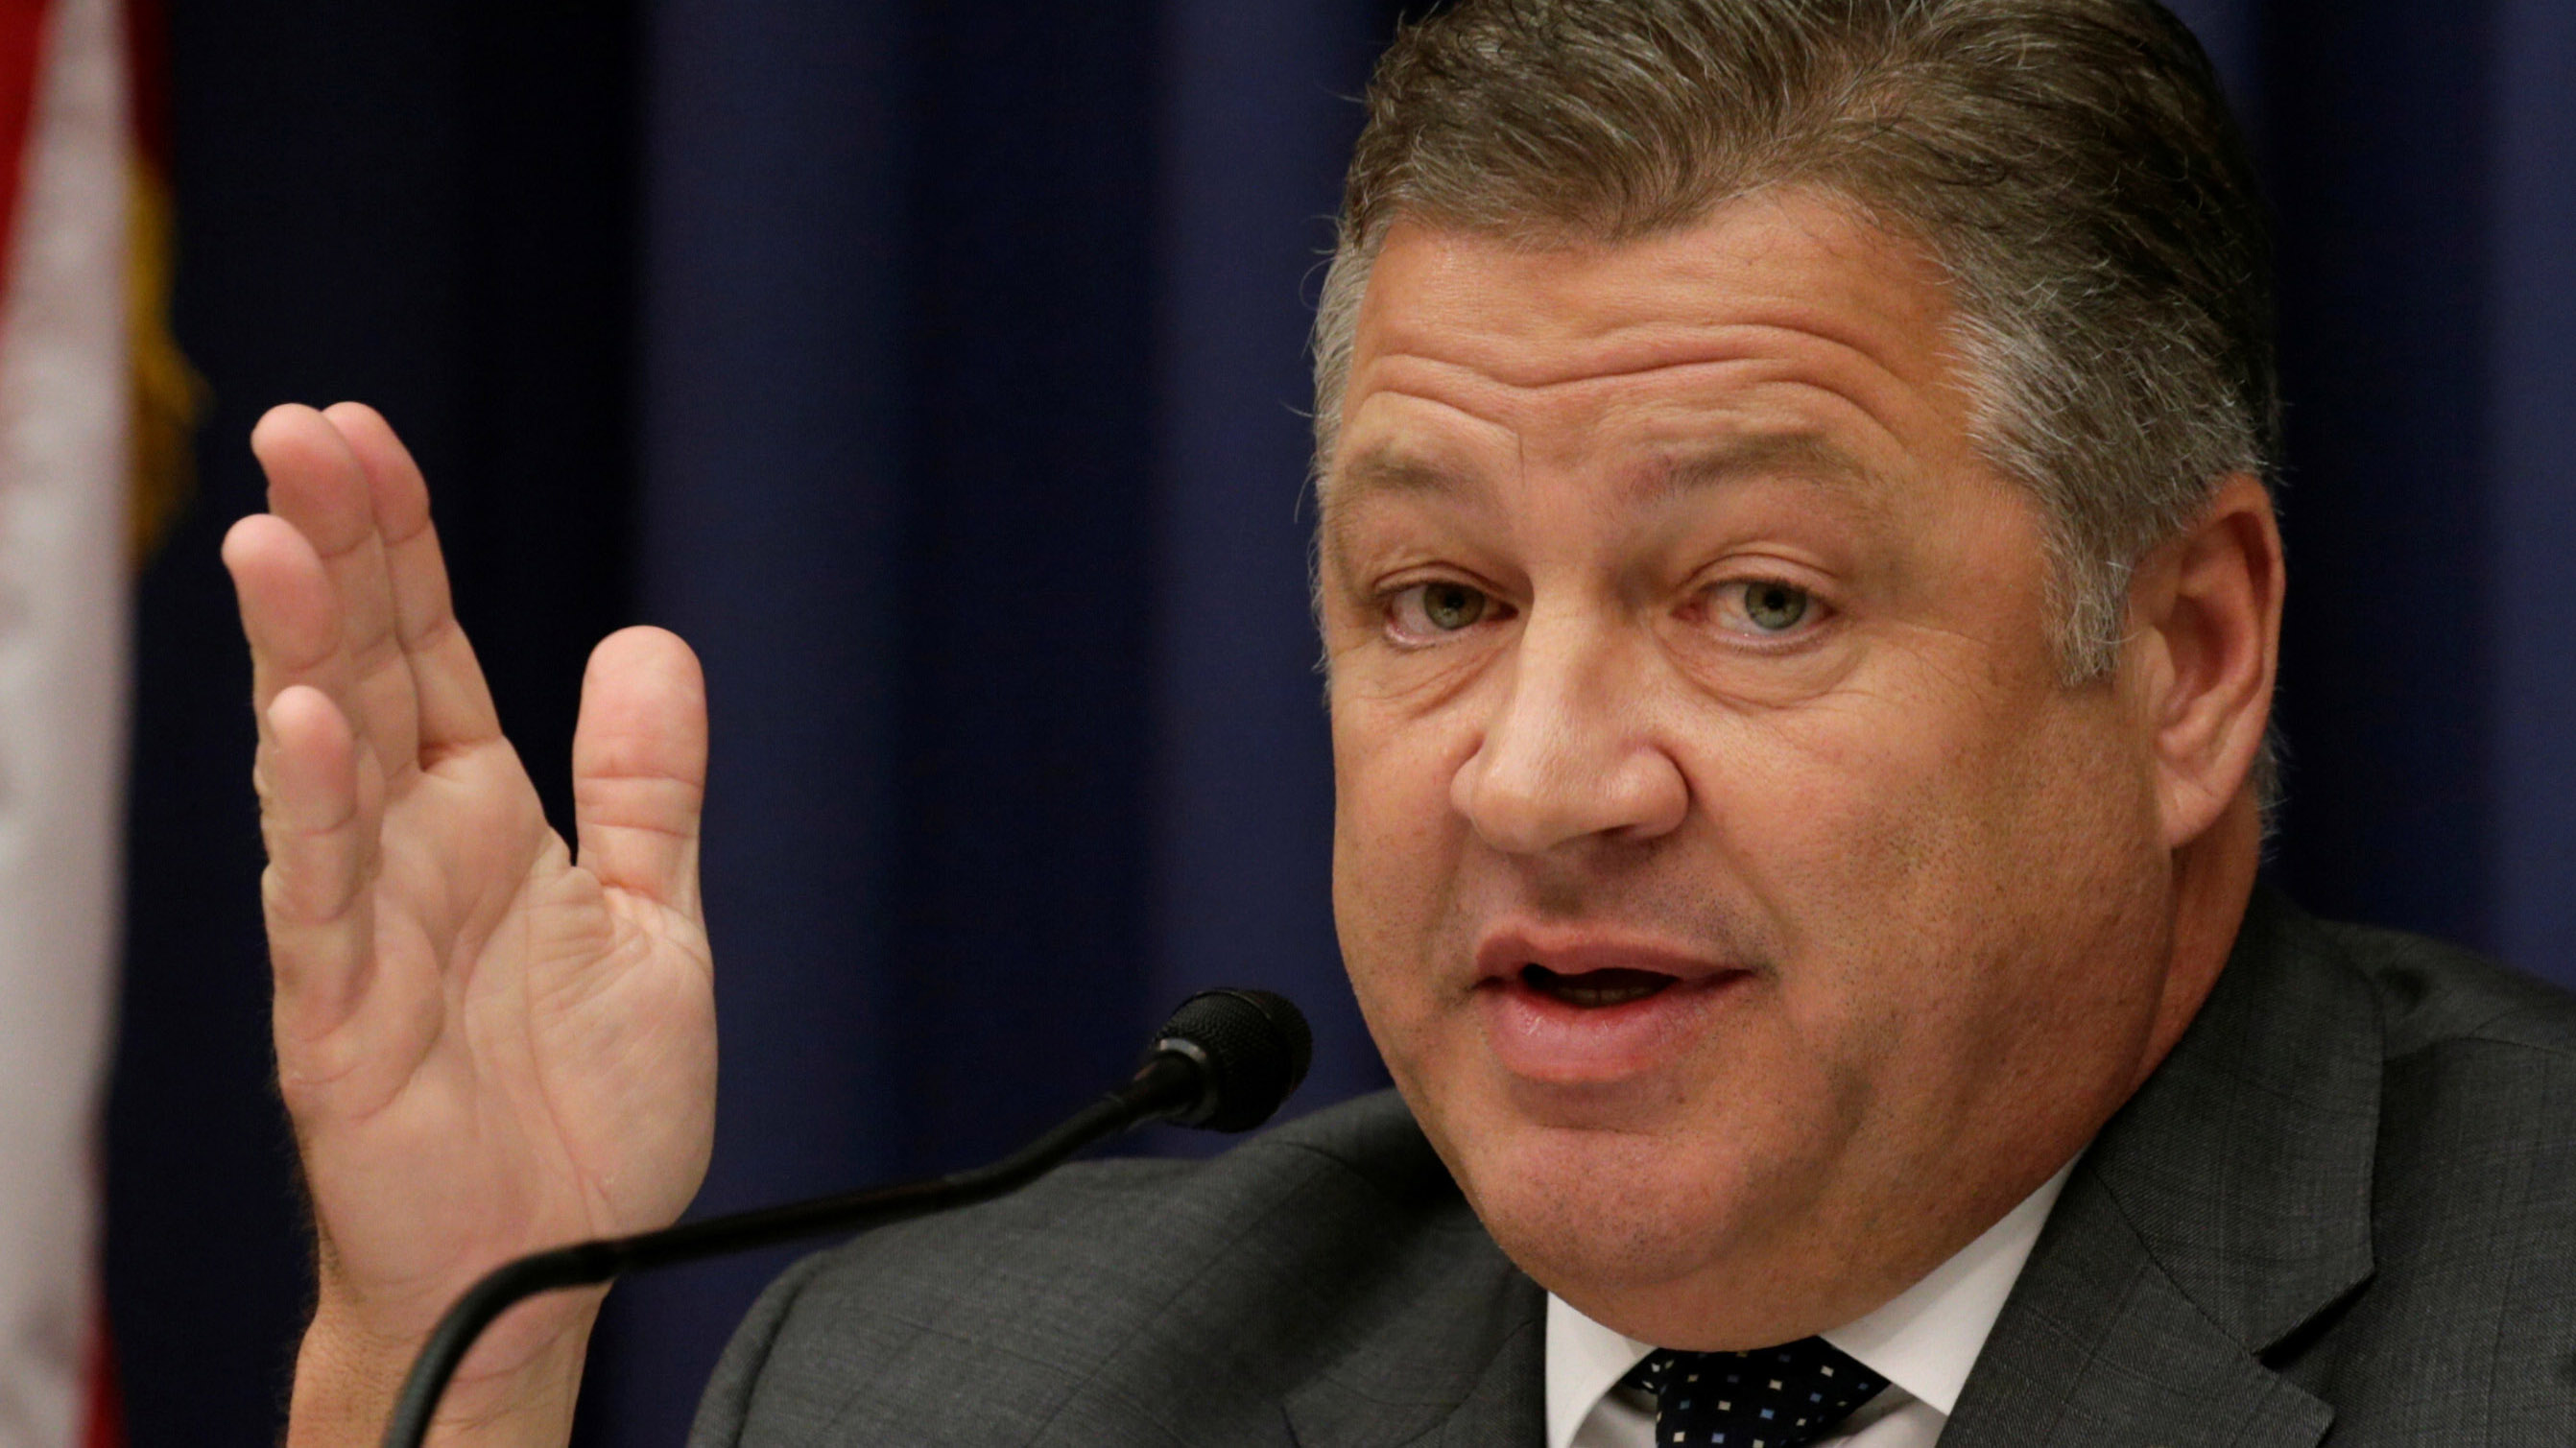 Chairman of the House Committee on Transportation and Infrastructure Bill Shuster. File photo by Kevin Lamarque, Reuters.